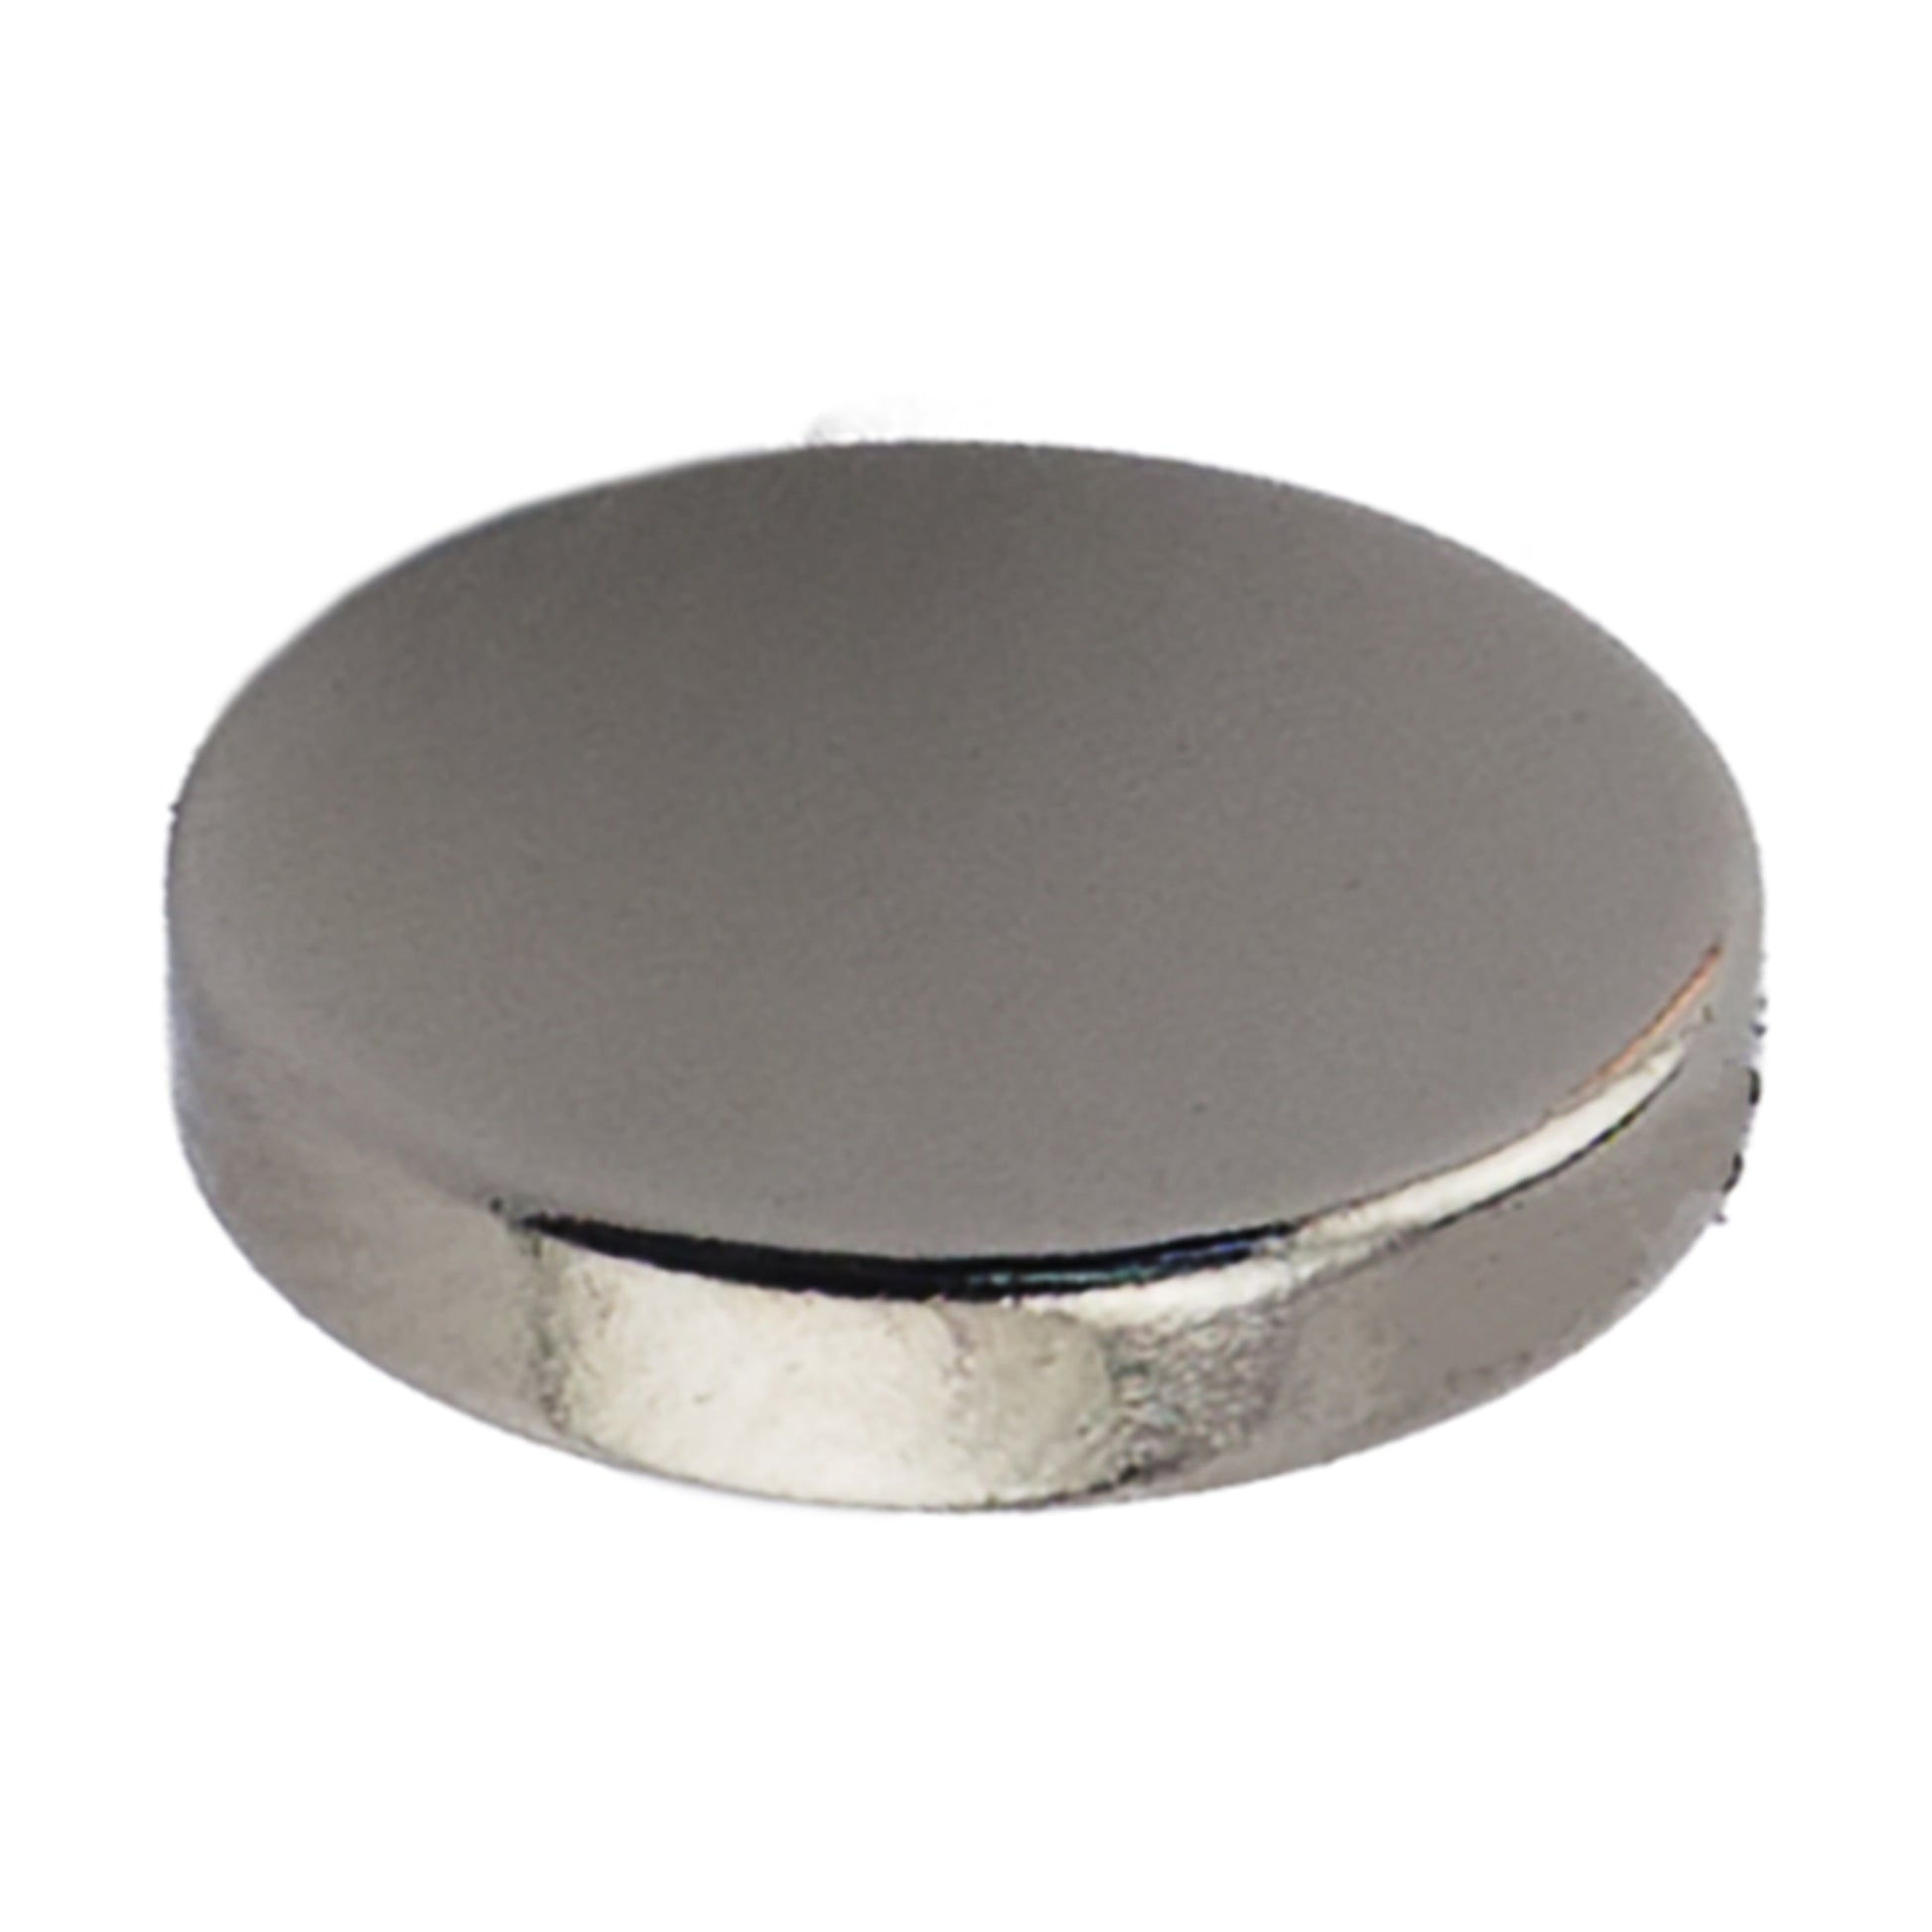 Load image into Gallery viewer, ND003749N Neodymium Disc Magnet - Front View